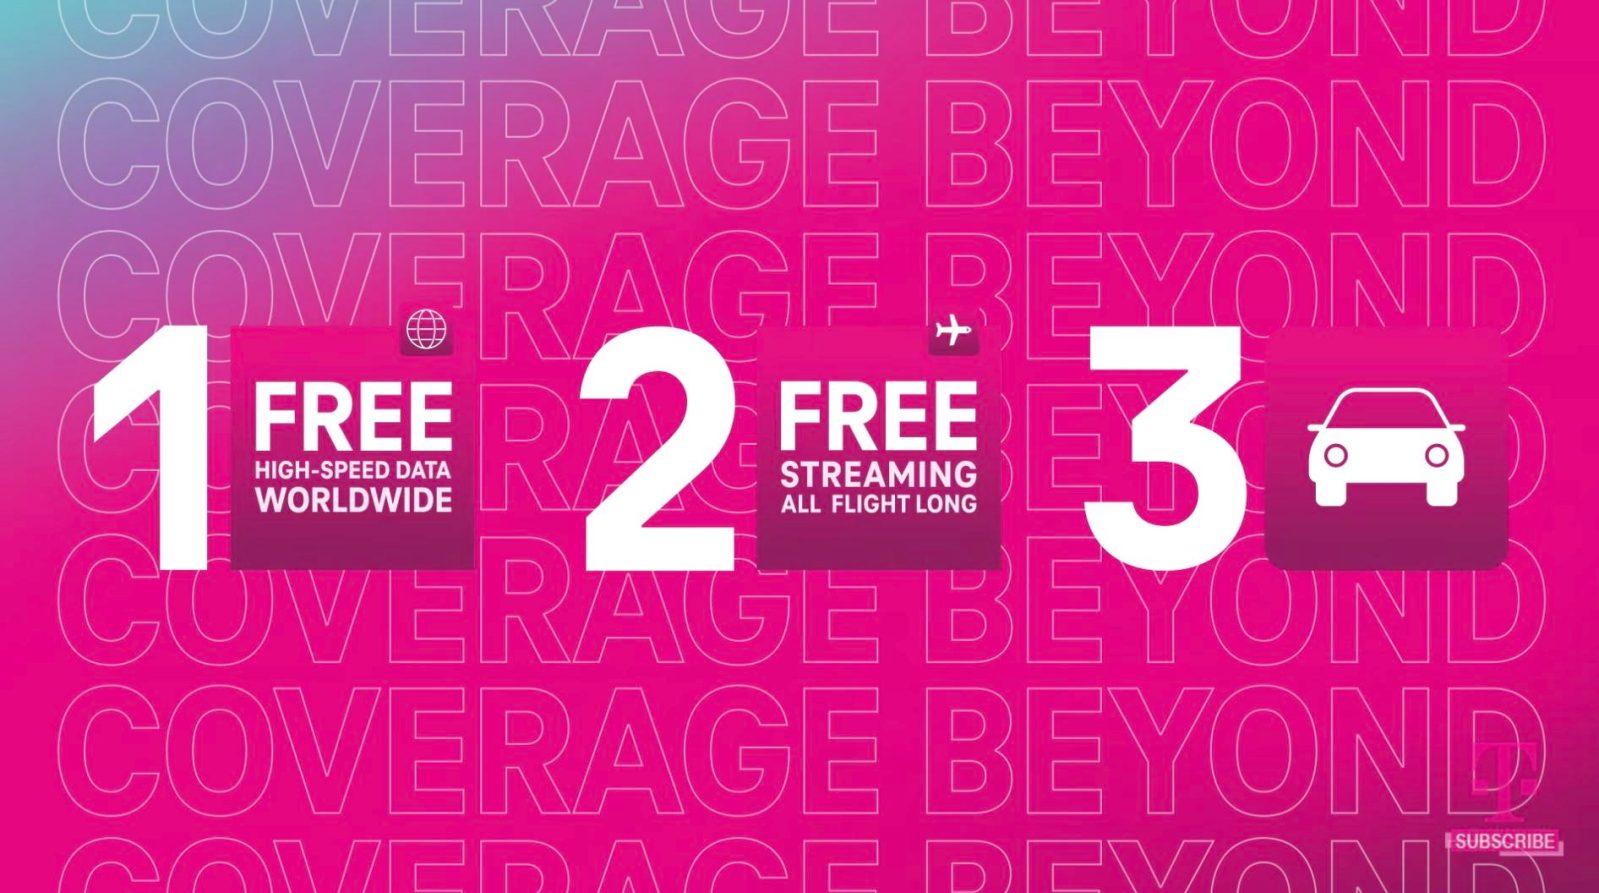 T-Mobile Coverage Beyond